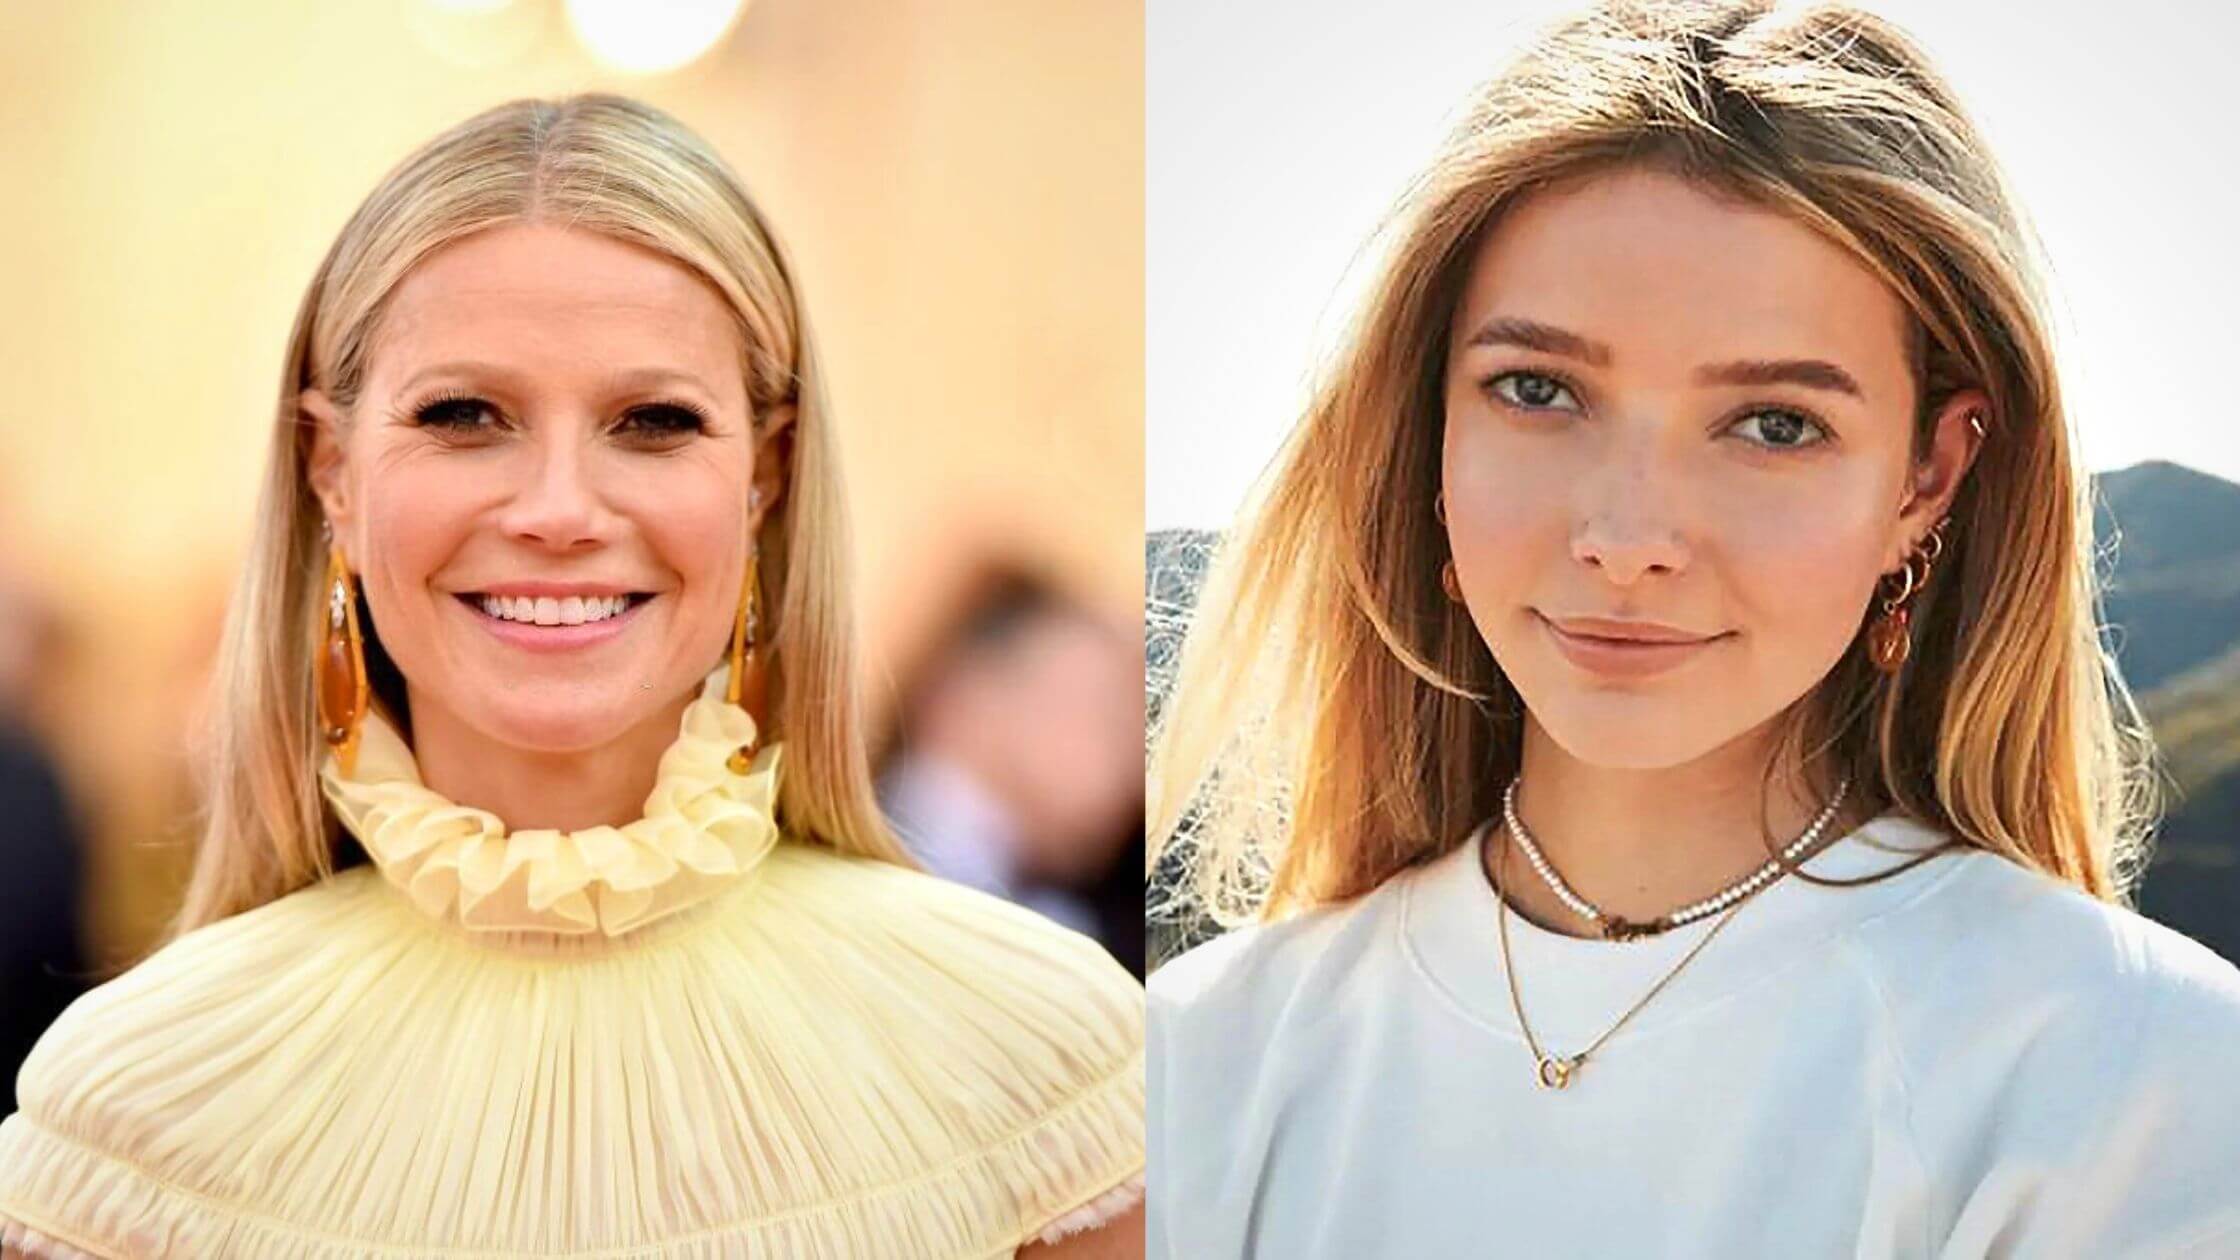 Gwyneth-Paltrows-Daughter-Apple-Martin-Bio-Age-Family-Relationships-Net-Worth-And-More-1